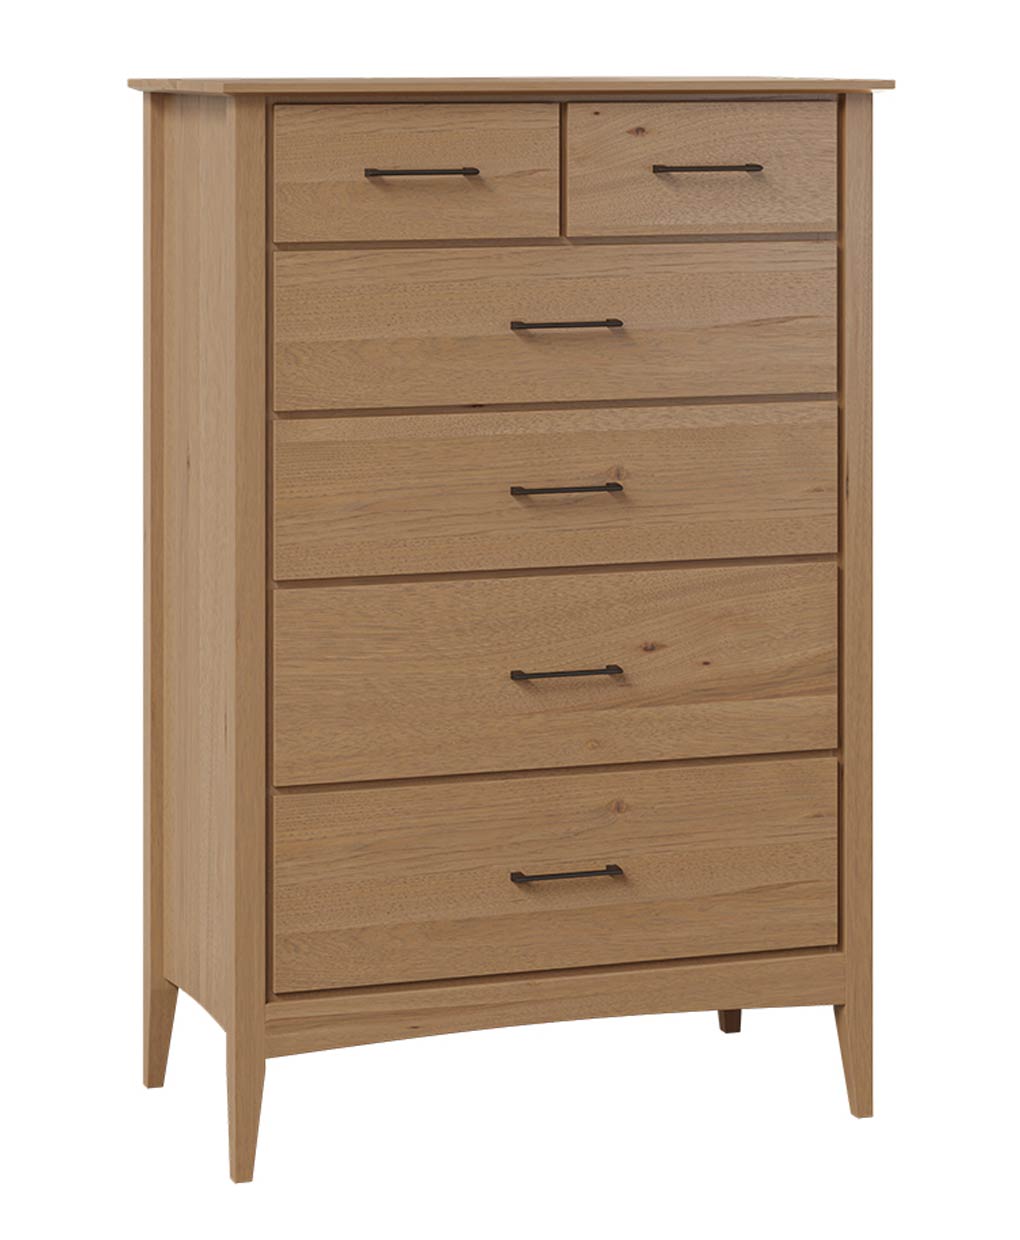 Furniture of America Acres Solid Wood 5-Drawer Chest, Natural Tone